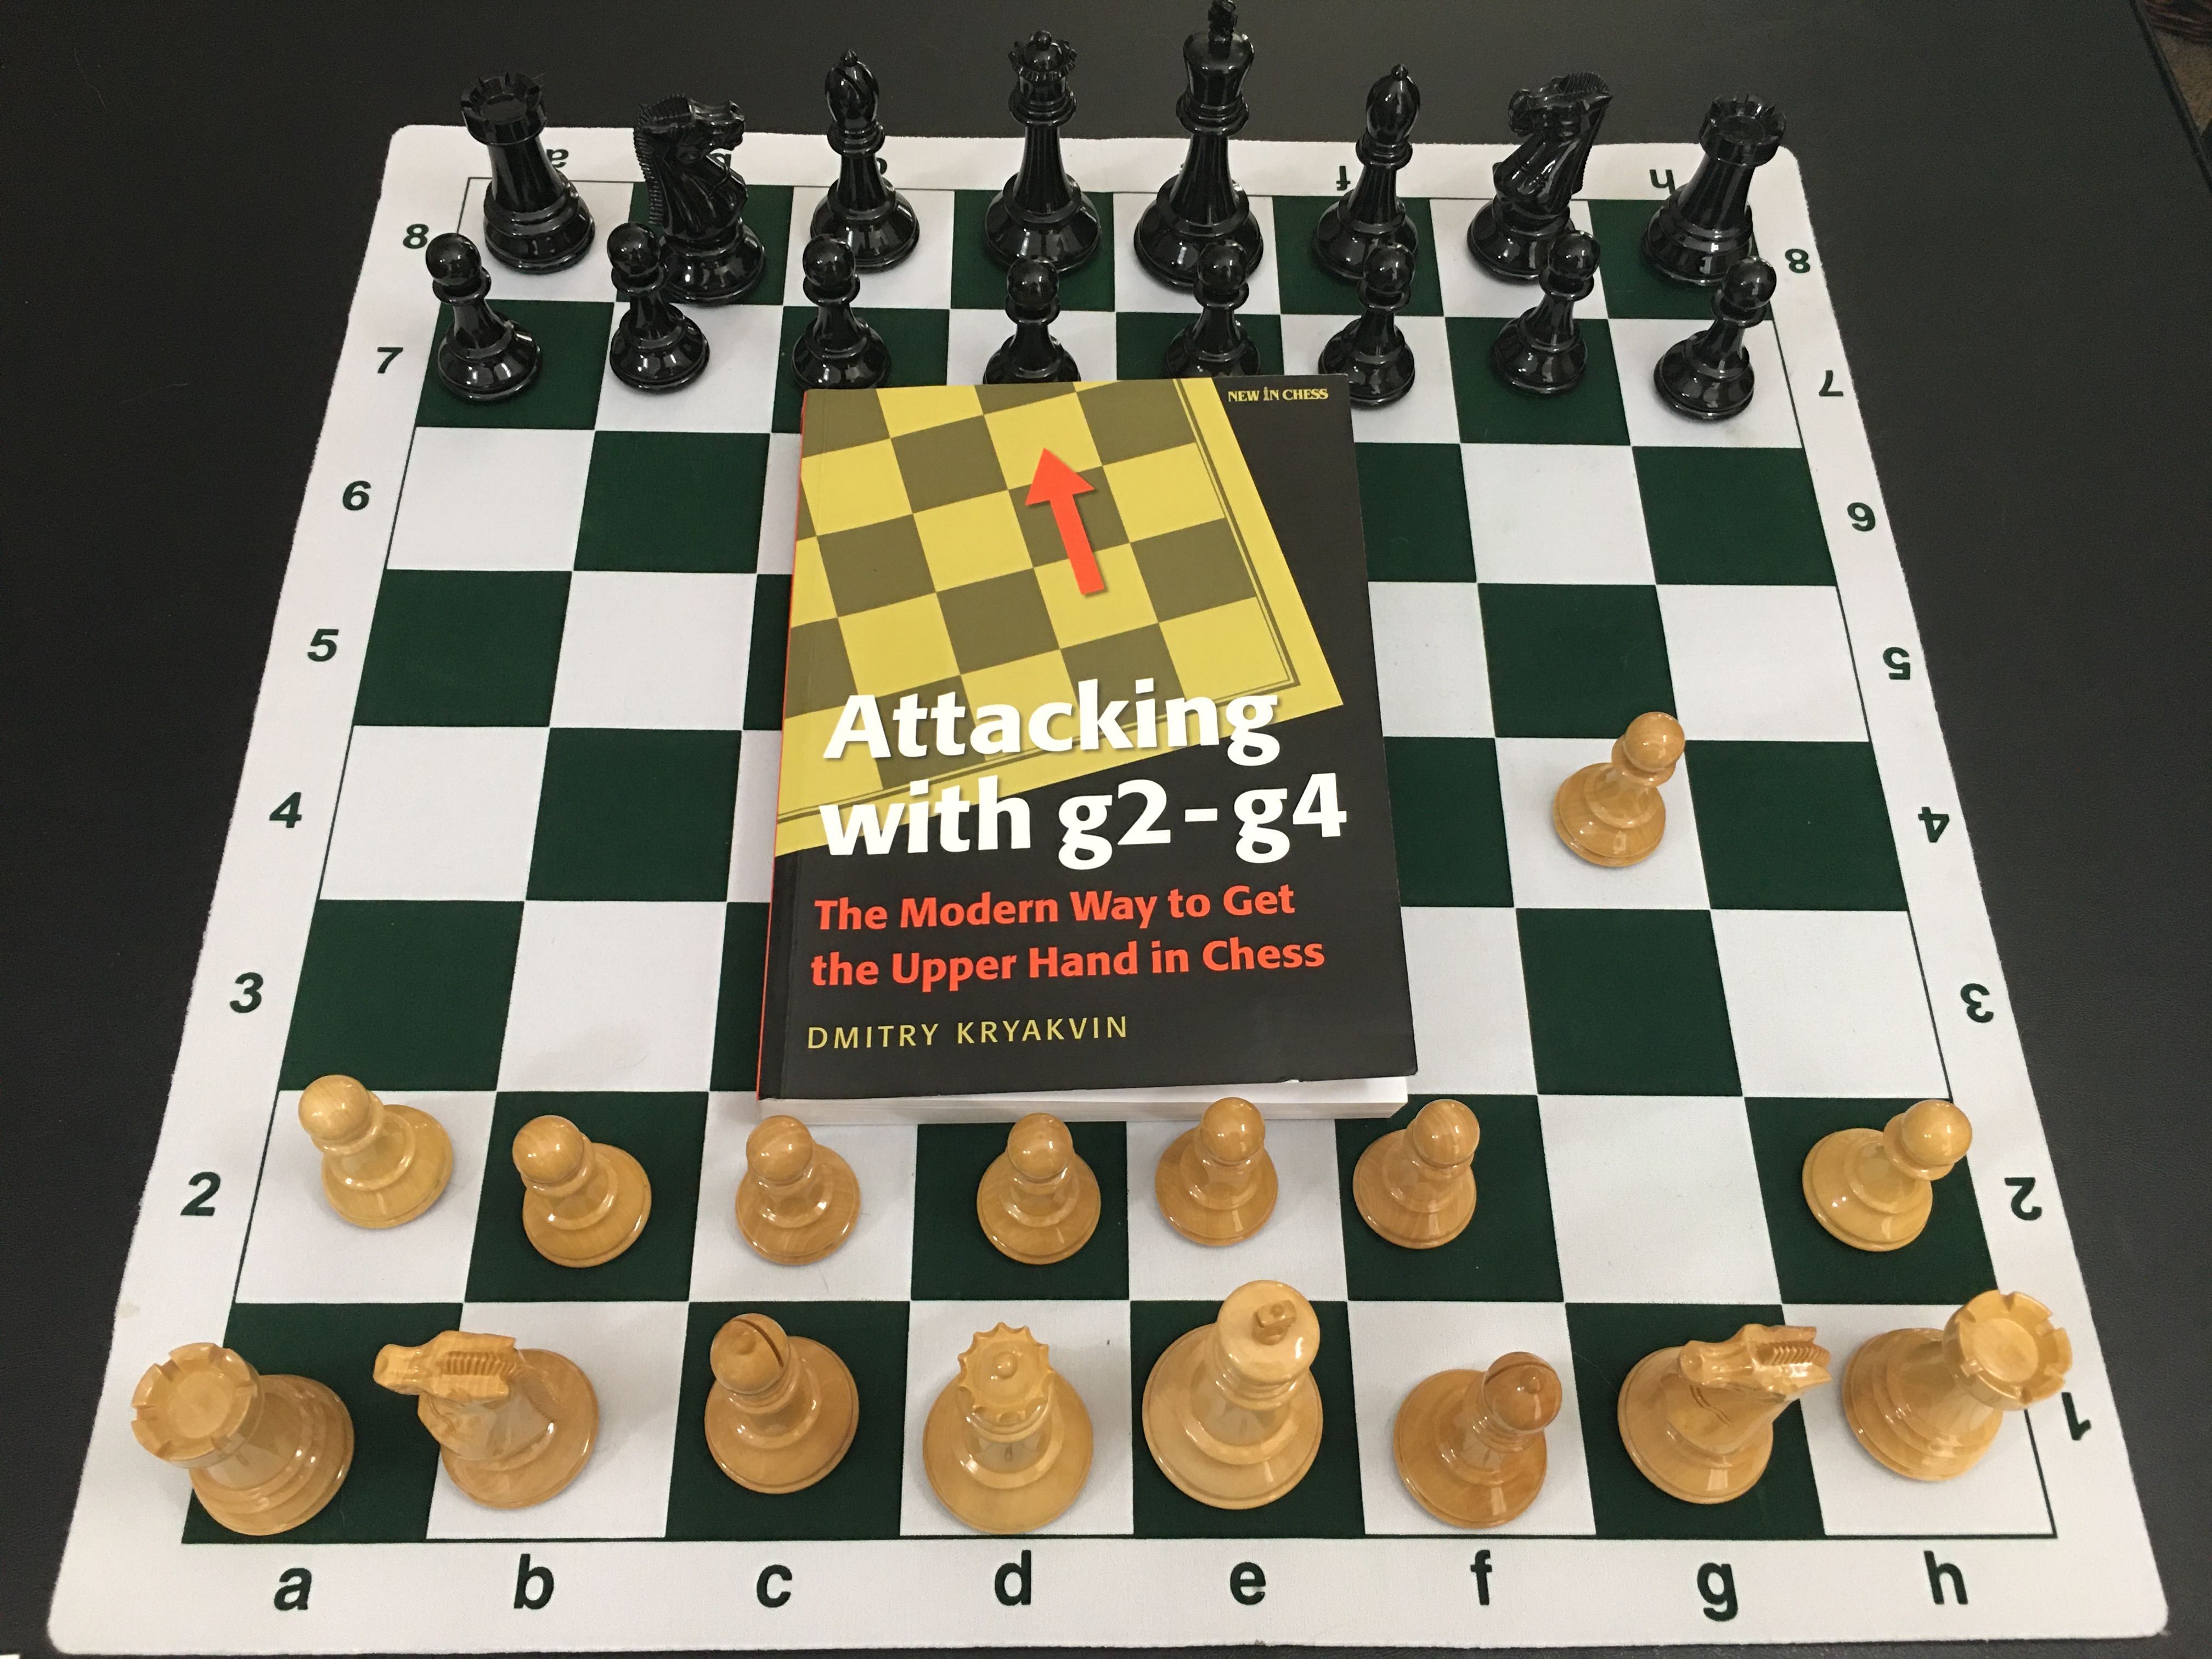 The HIPPO System: A Universal Chess Opening for White & Black by